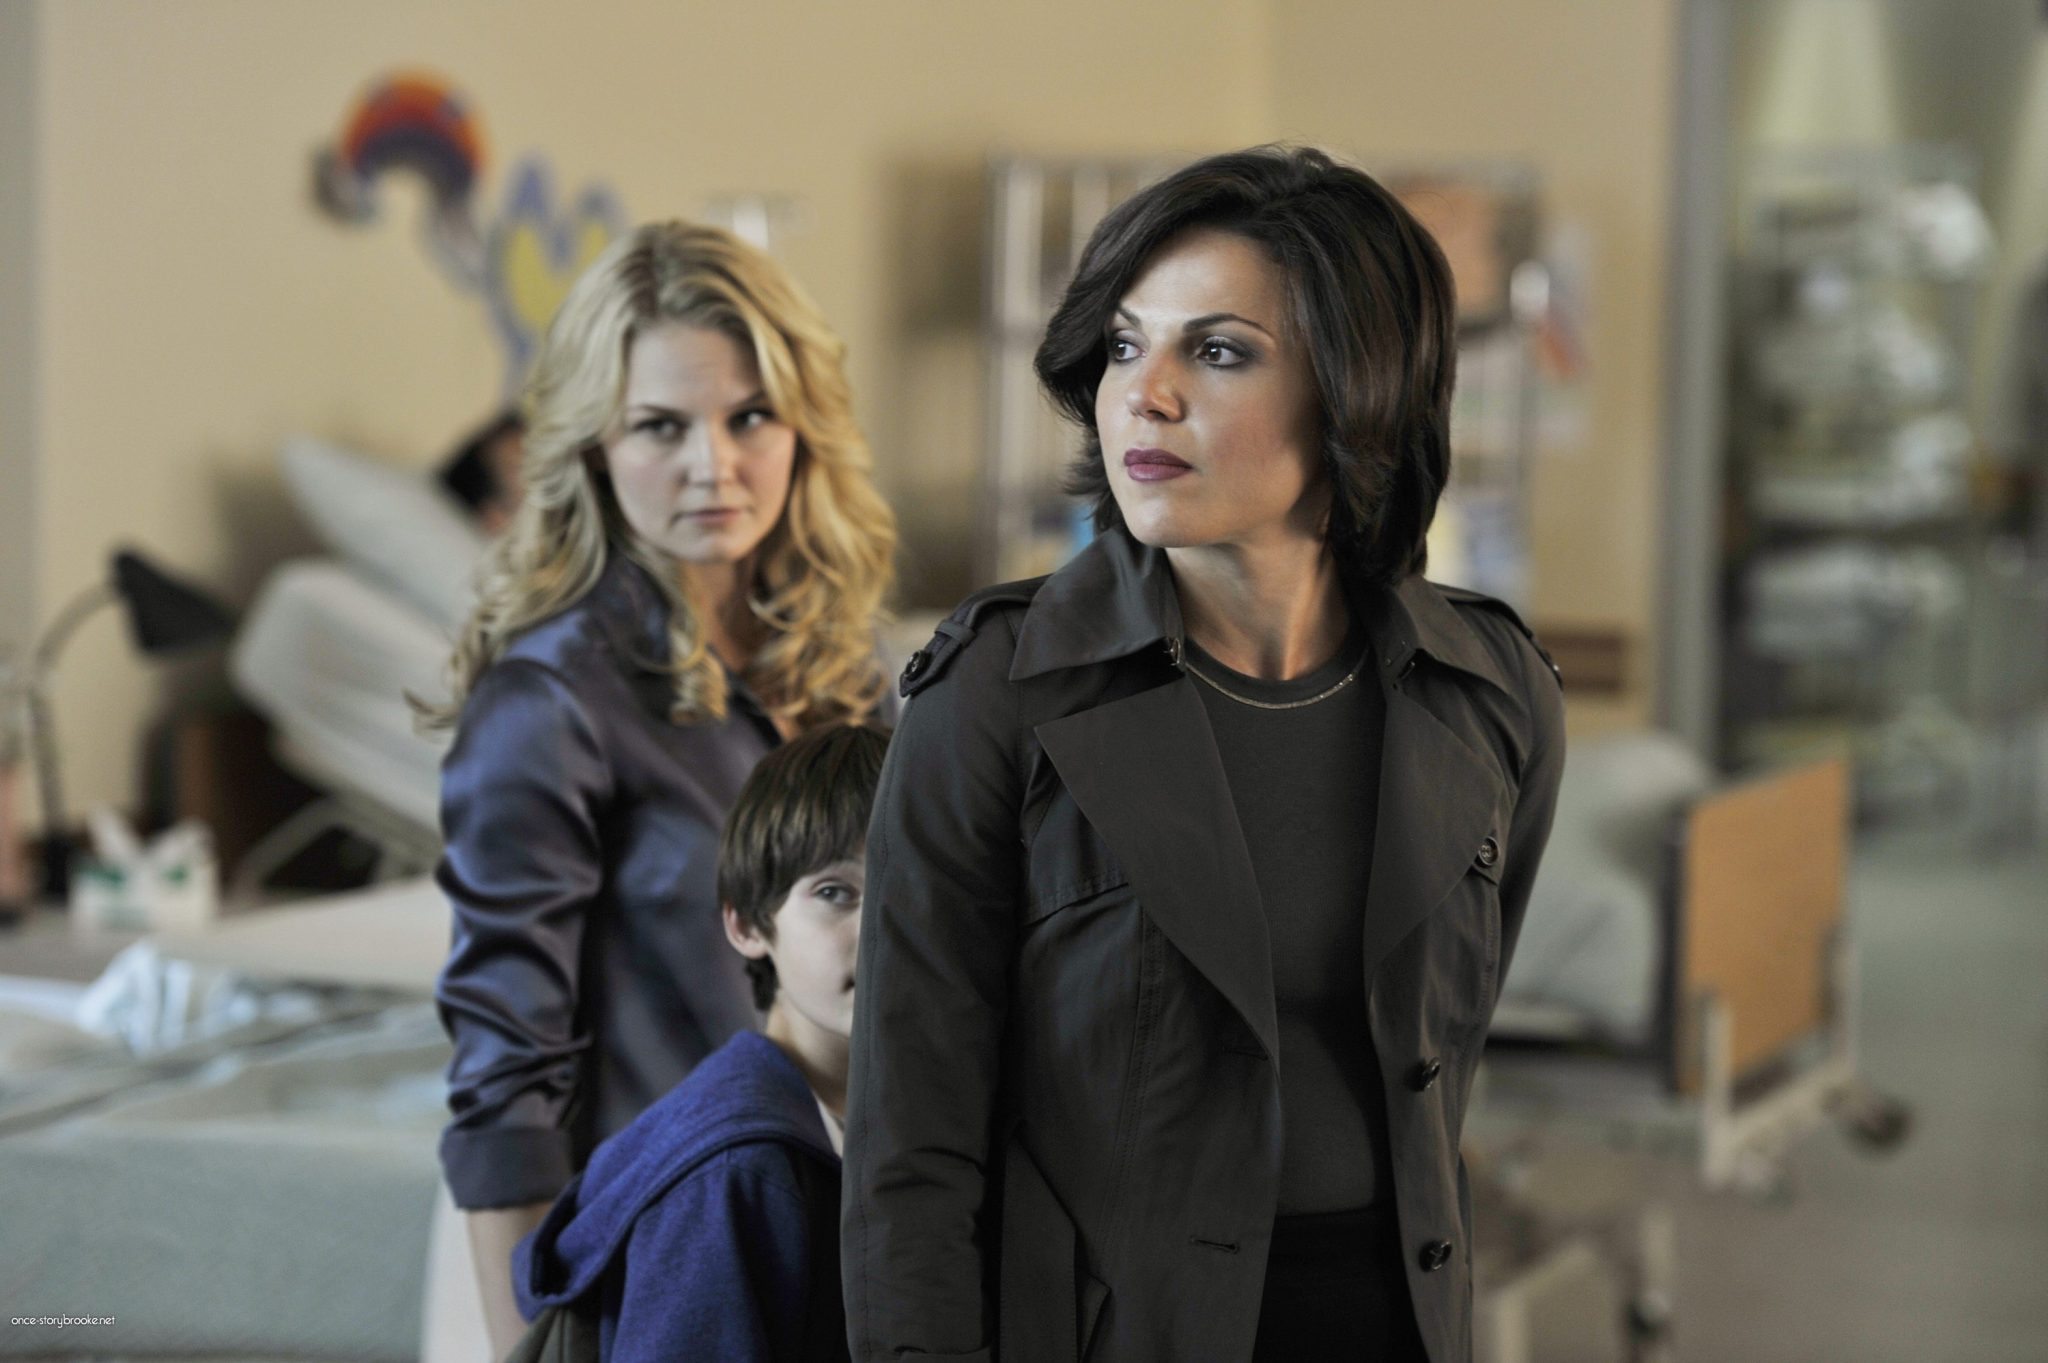 Regina, Emma, and Henry are starring into a hospital room where an unseen Charming is resting.